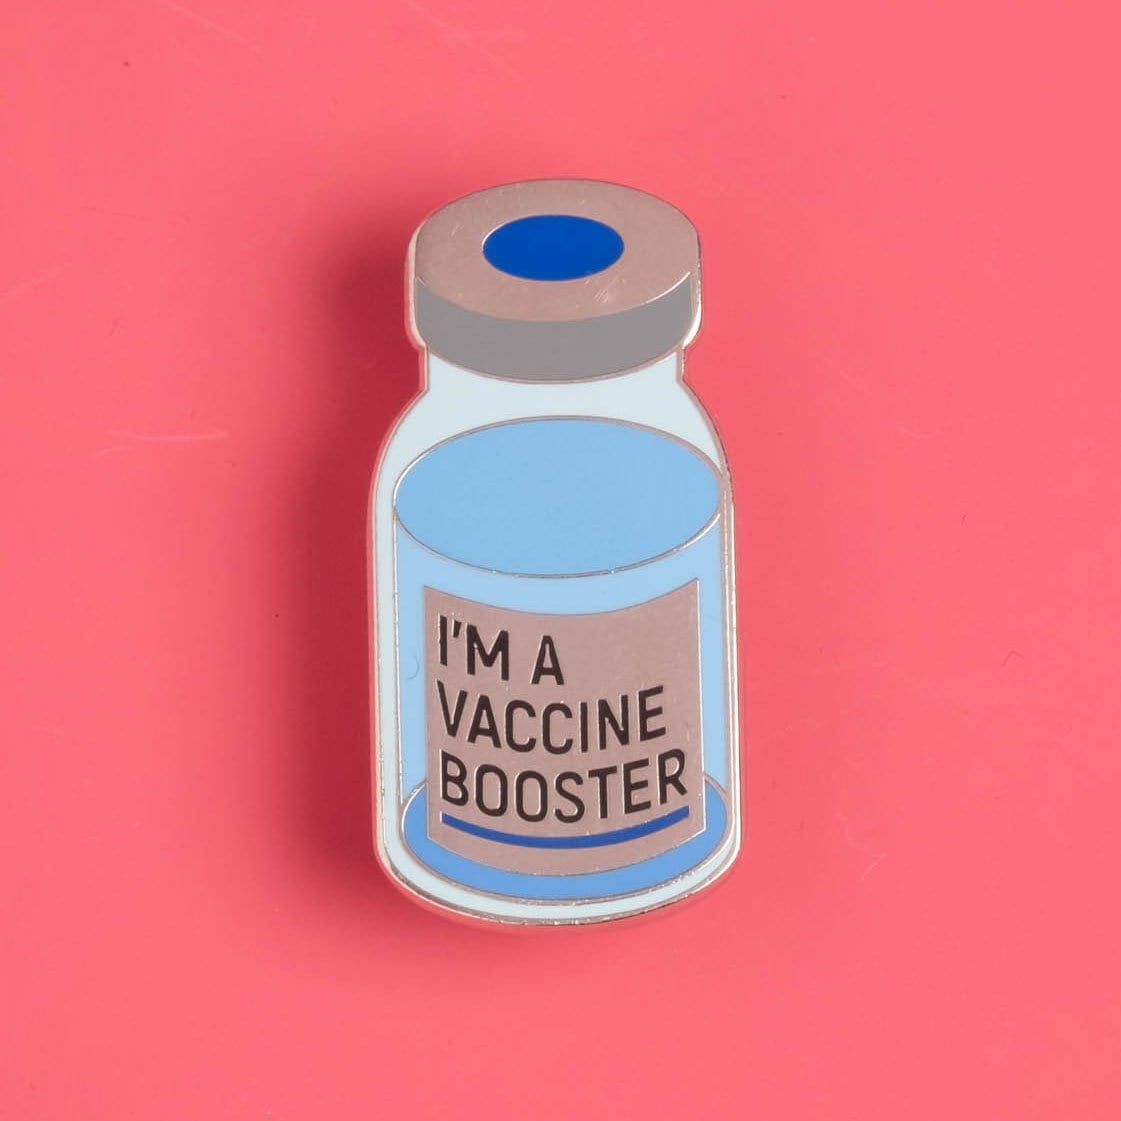 I'm a Vaccine Booster - Vial Pin